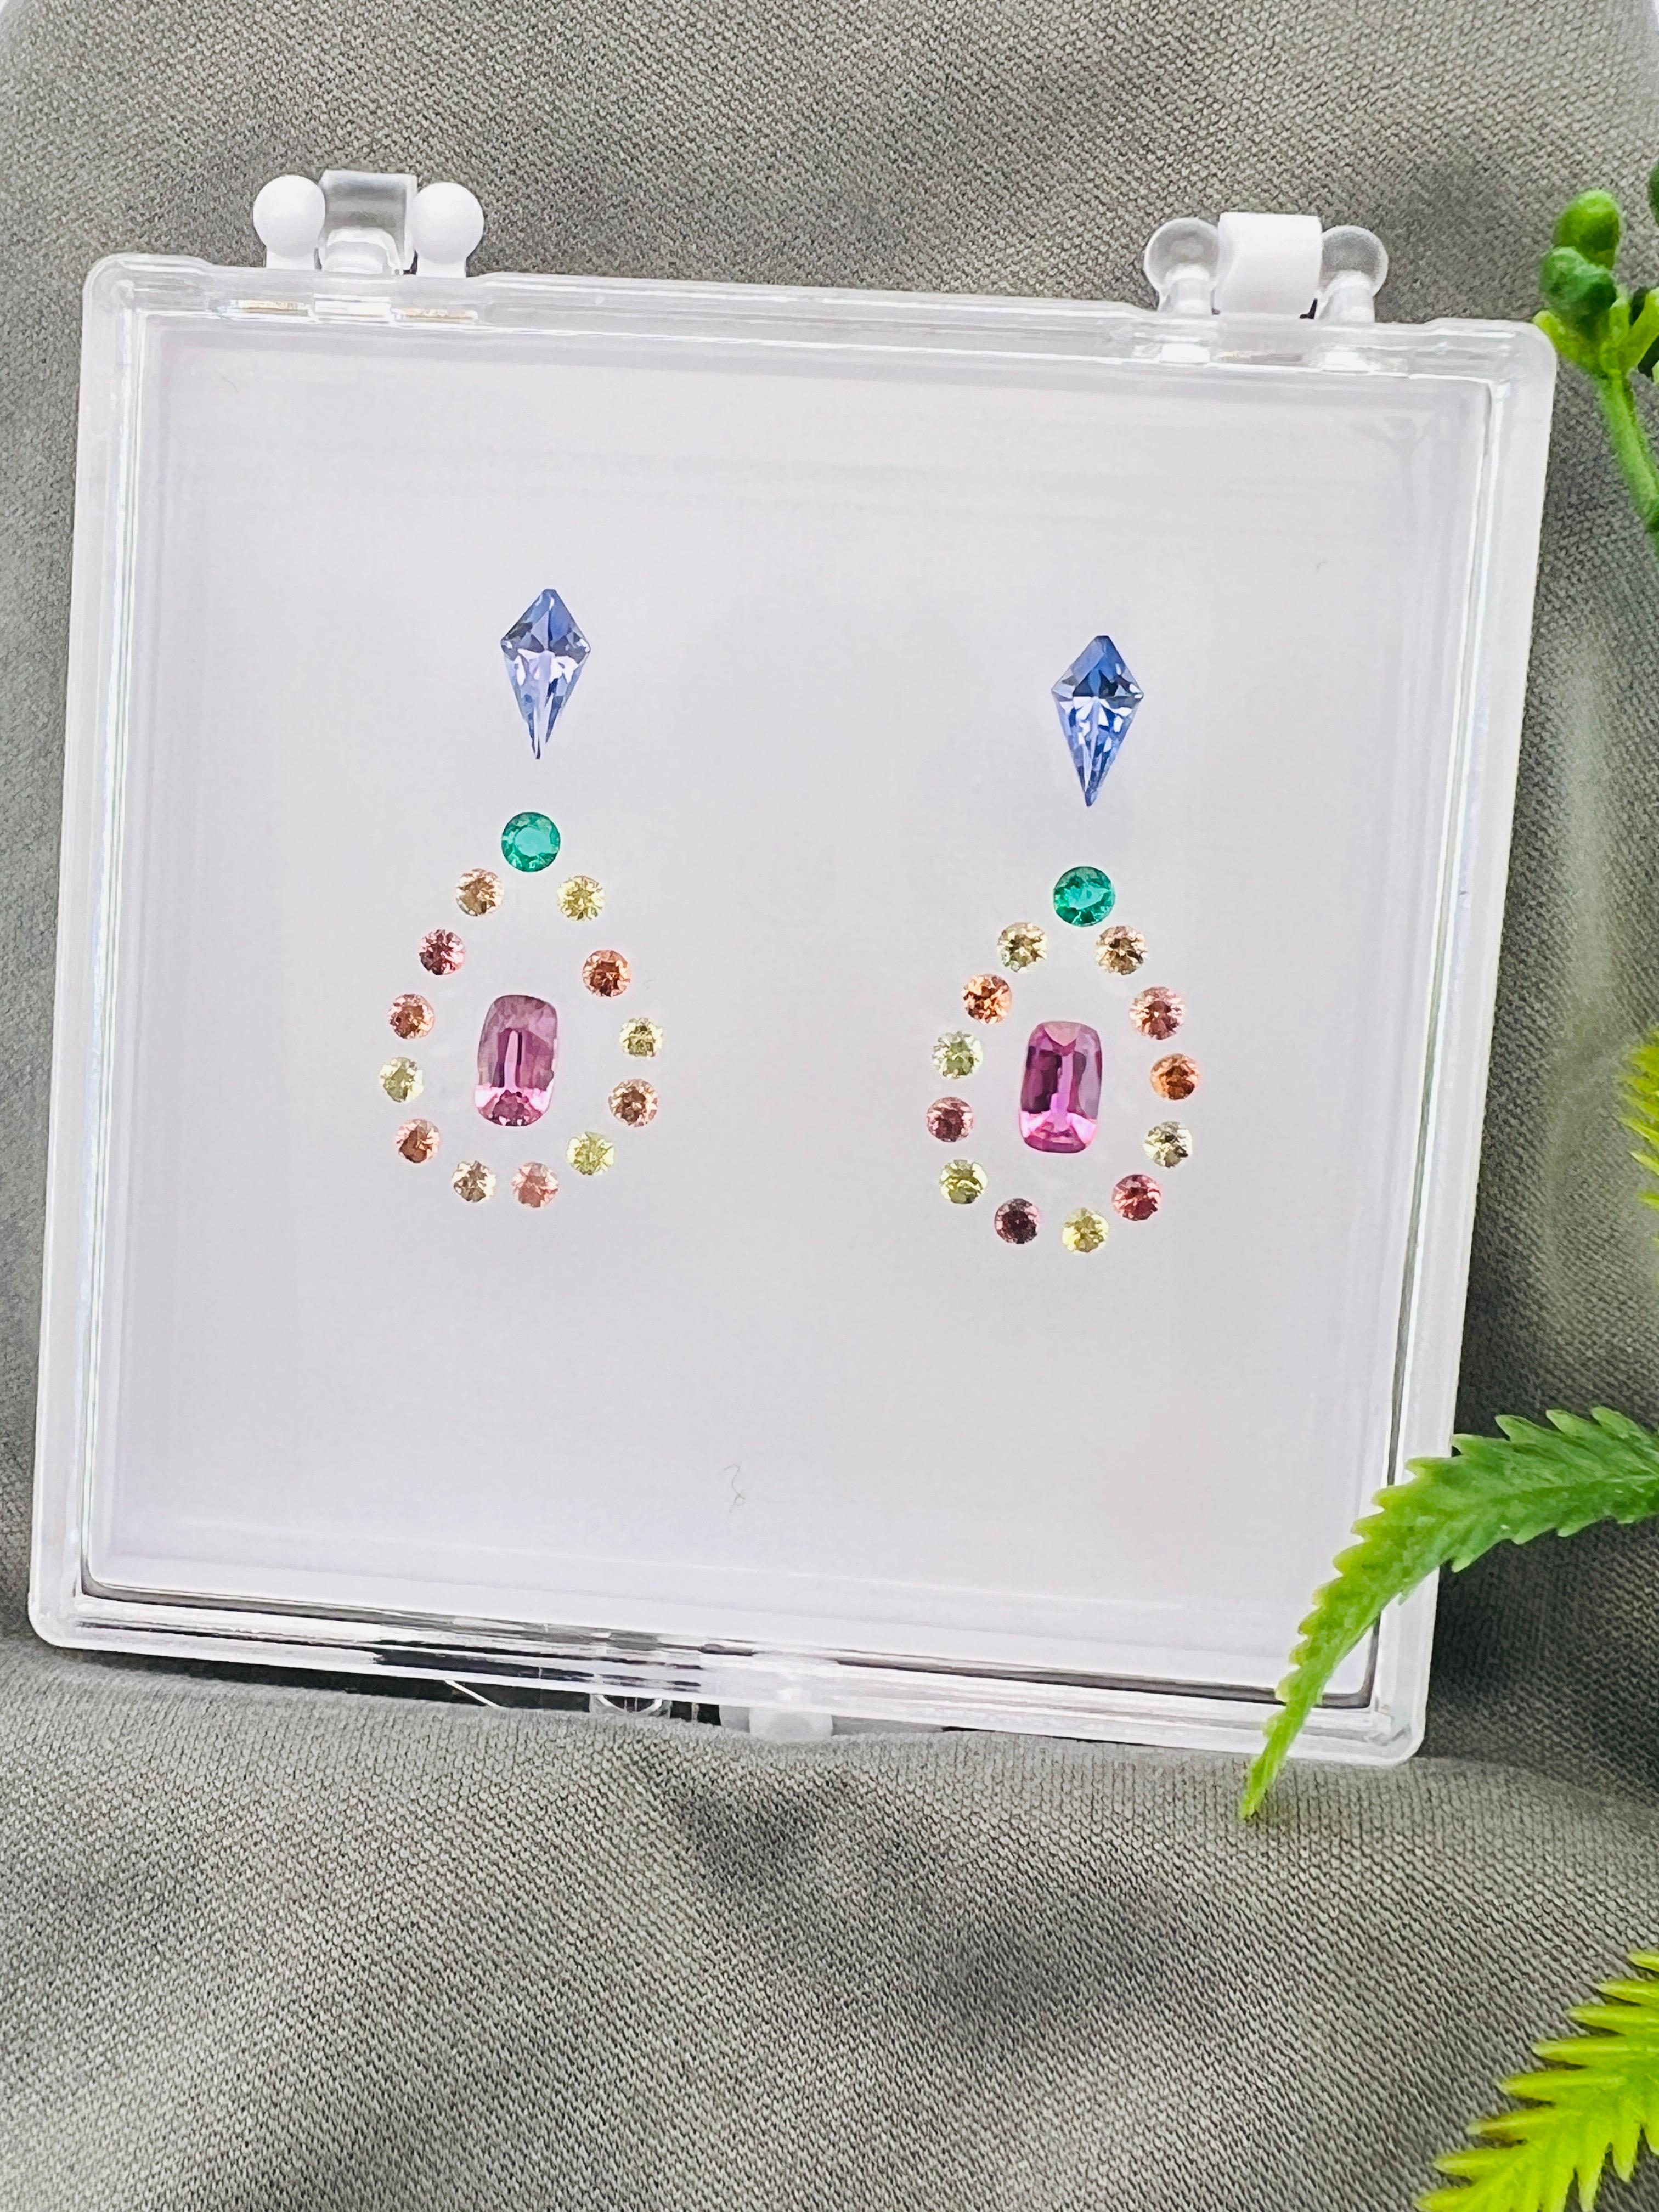 Women's Unique earring design by WB all natural color gemstone 2.09ct customize jewelry  For Sale